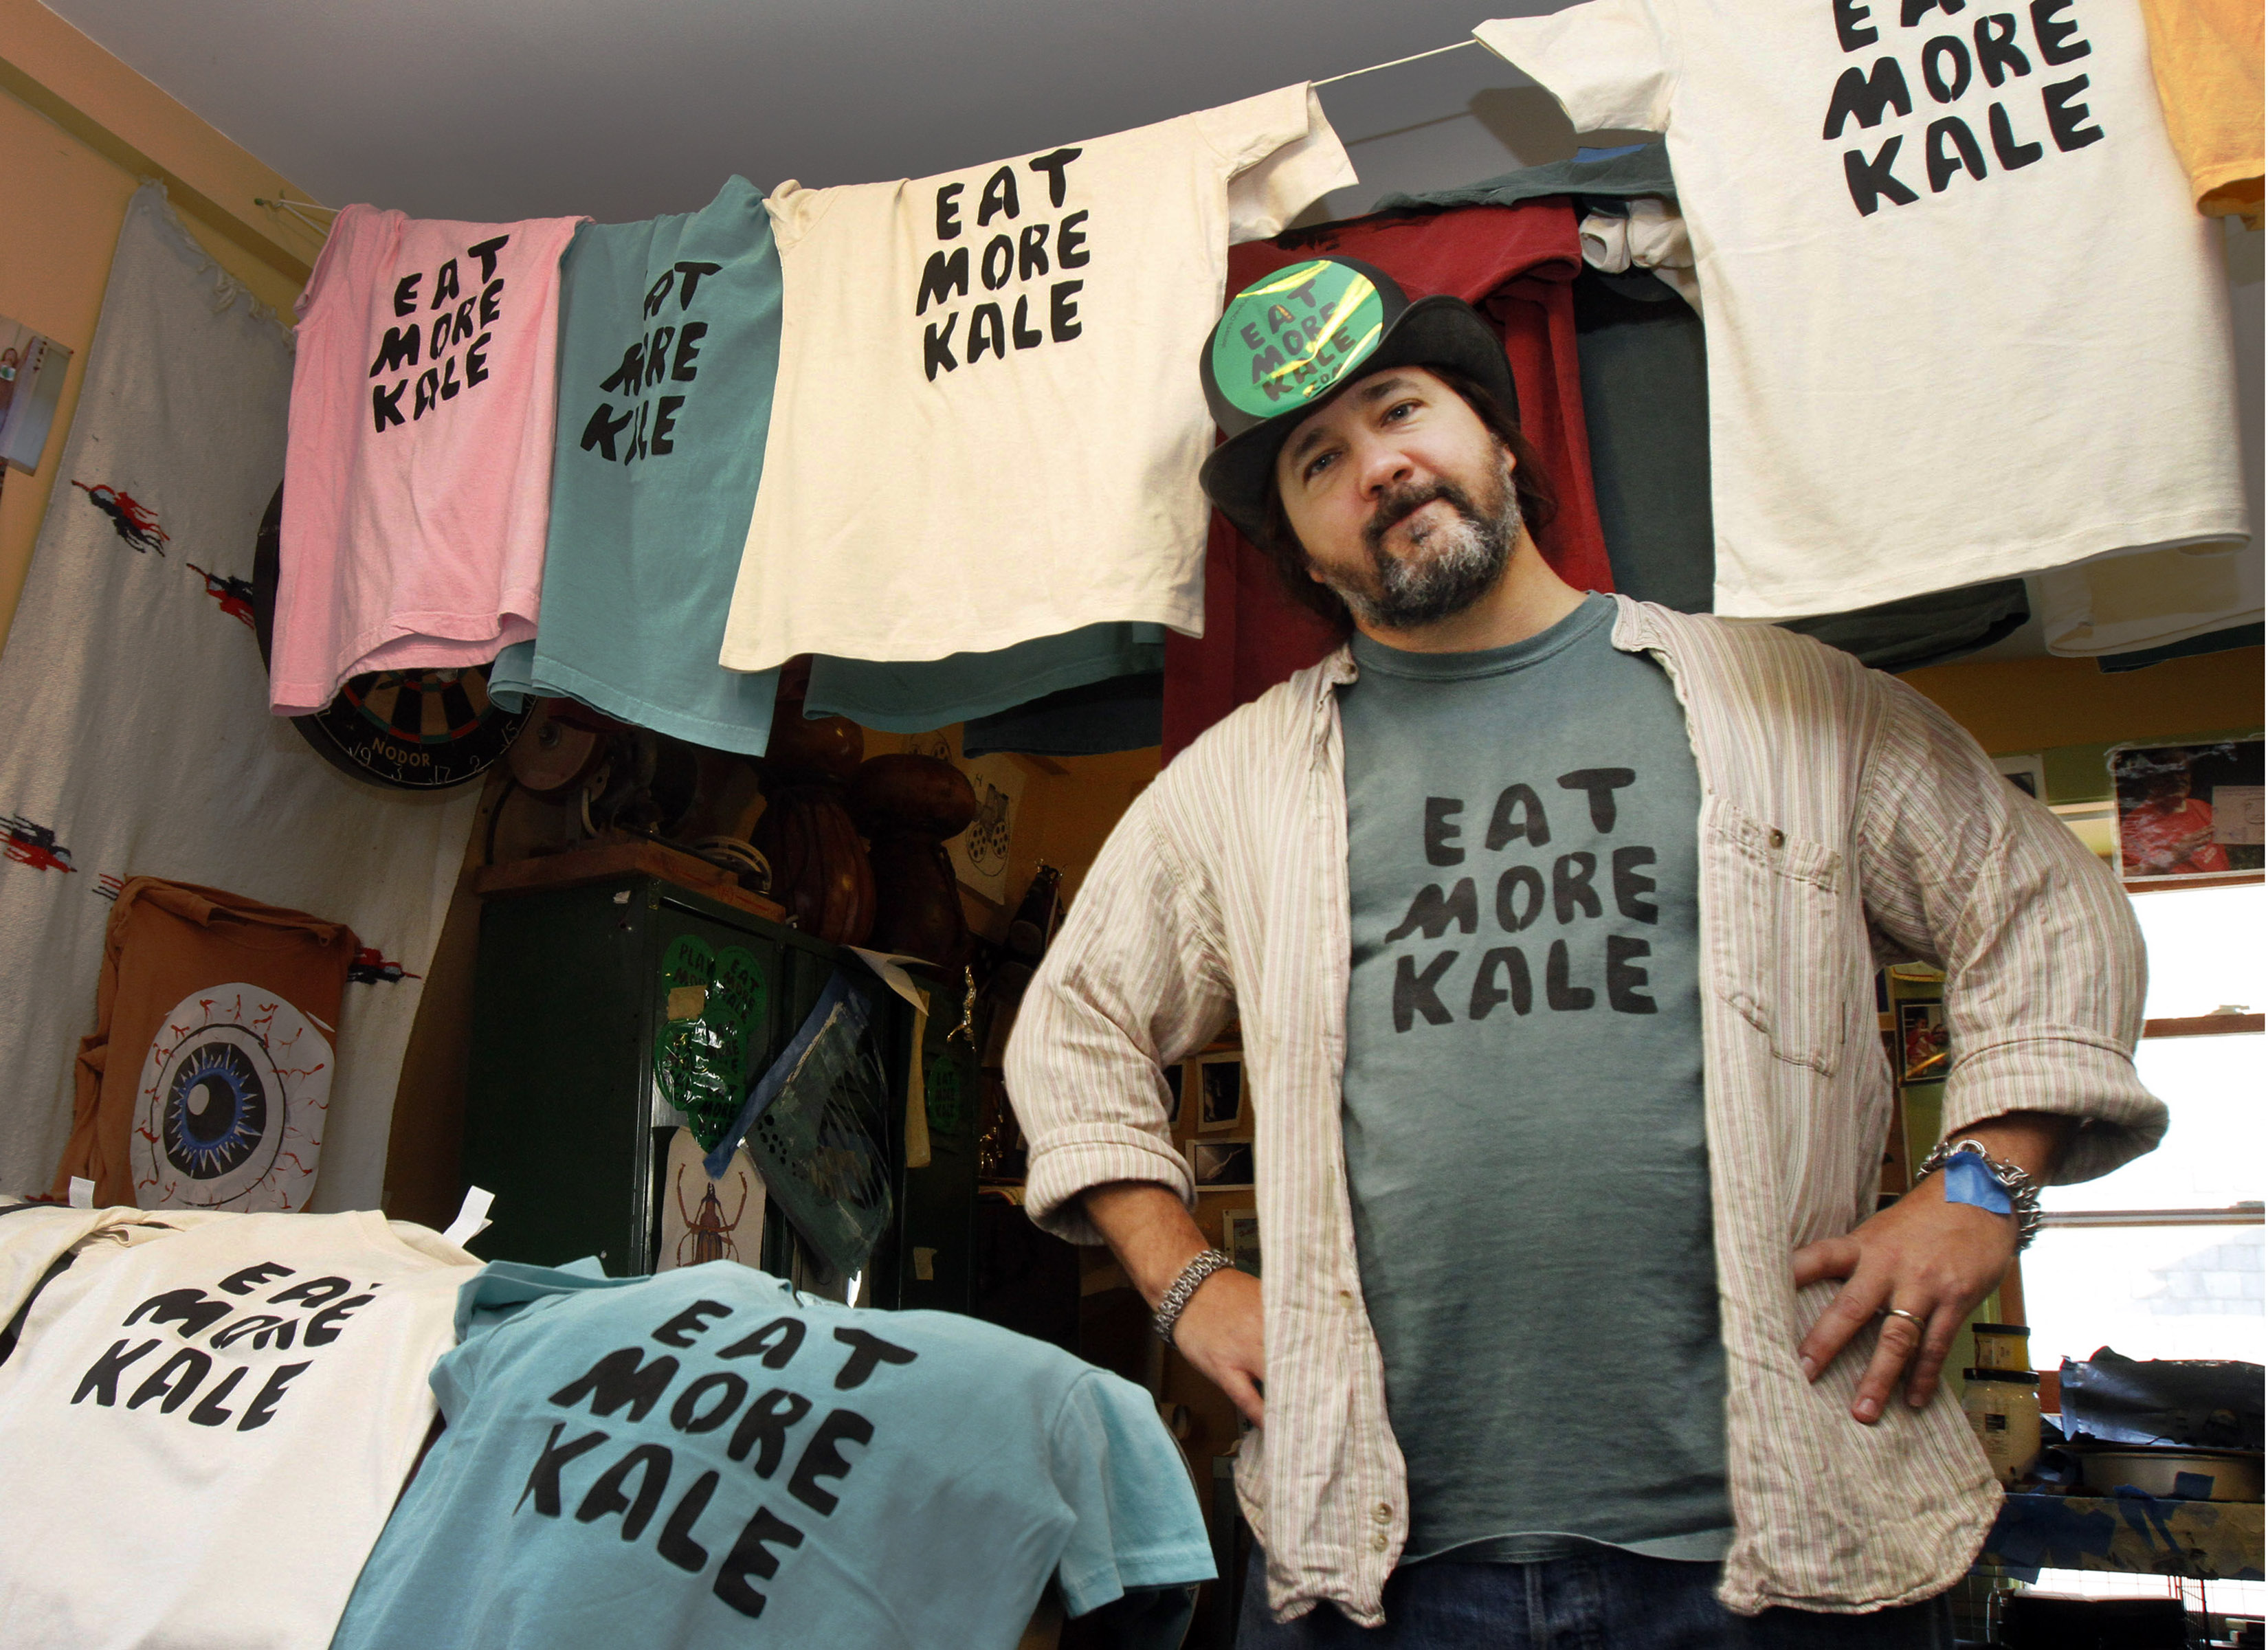 Bo Muller-Moore stands in his home studio in Montpelier, Vt. Muller-Moore, the Vermont man who is building a business around the term "eat more kale," which has been plastered on T-shirts, bumper stickers and other items, is running into opposition from the second largest fried chicken retailer in the country, Chick-fil-A, on Nov. 22, 2011. (Toby Talbot—AP)